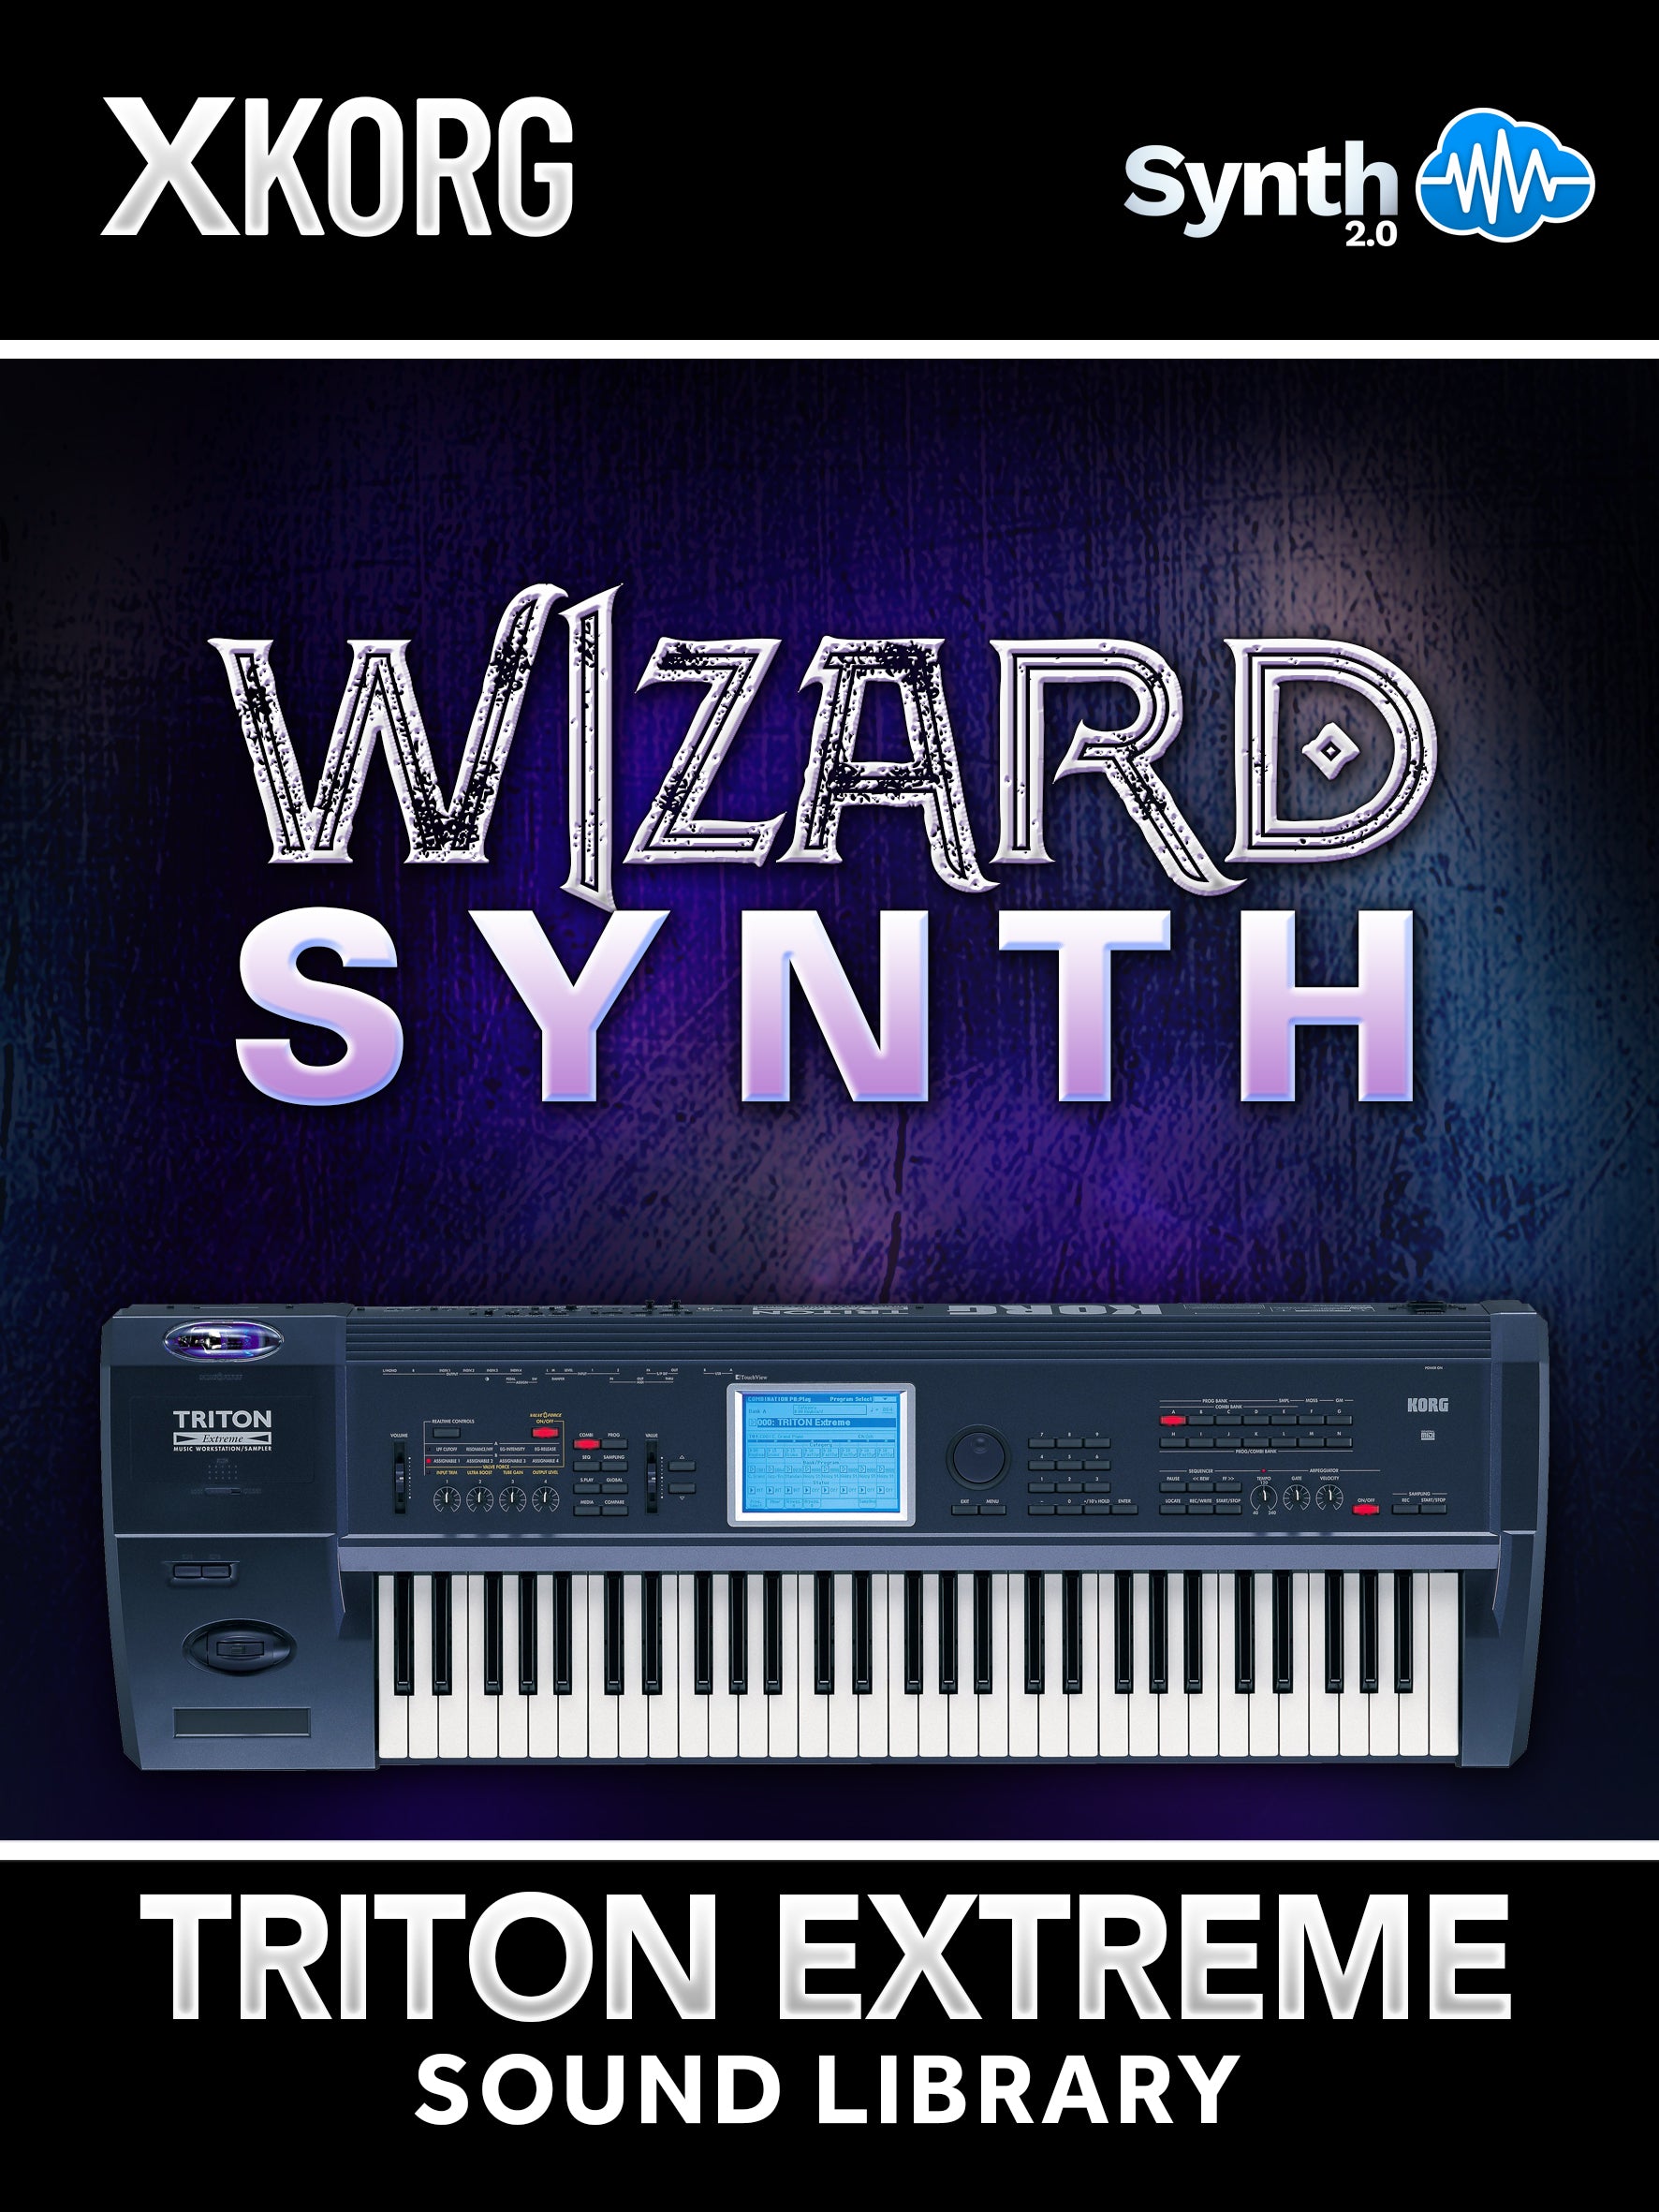 SSX103 - Wizard Synth - Korg Triton EXTREME ( 18 presets )